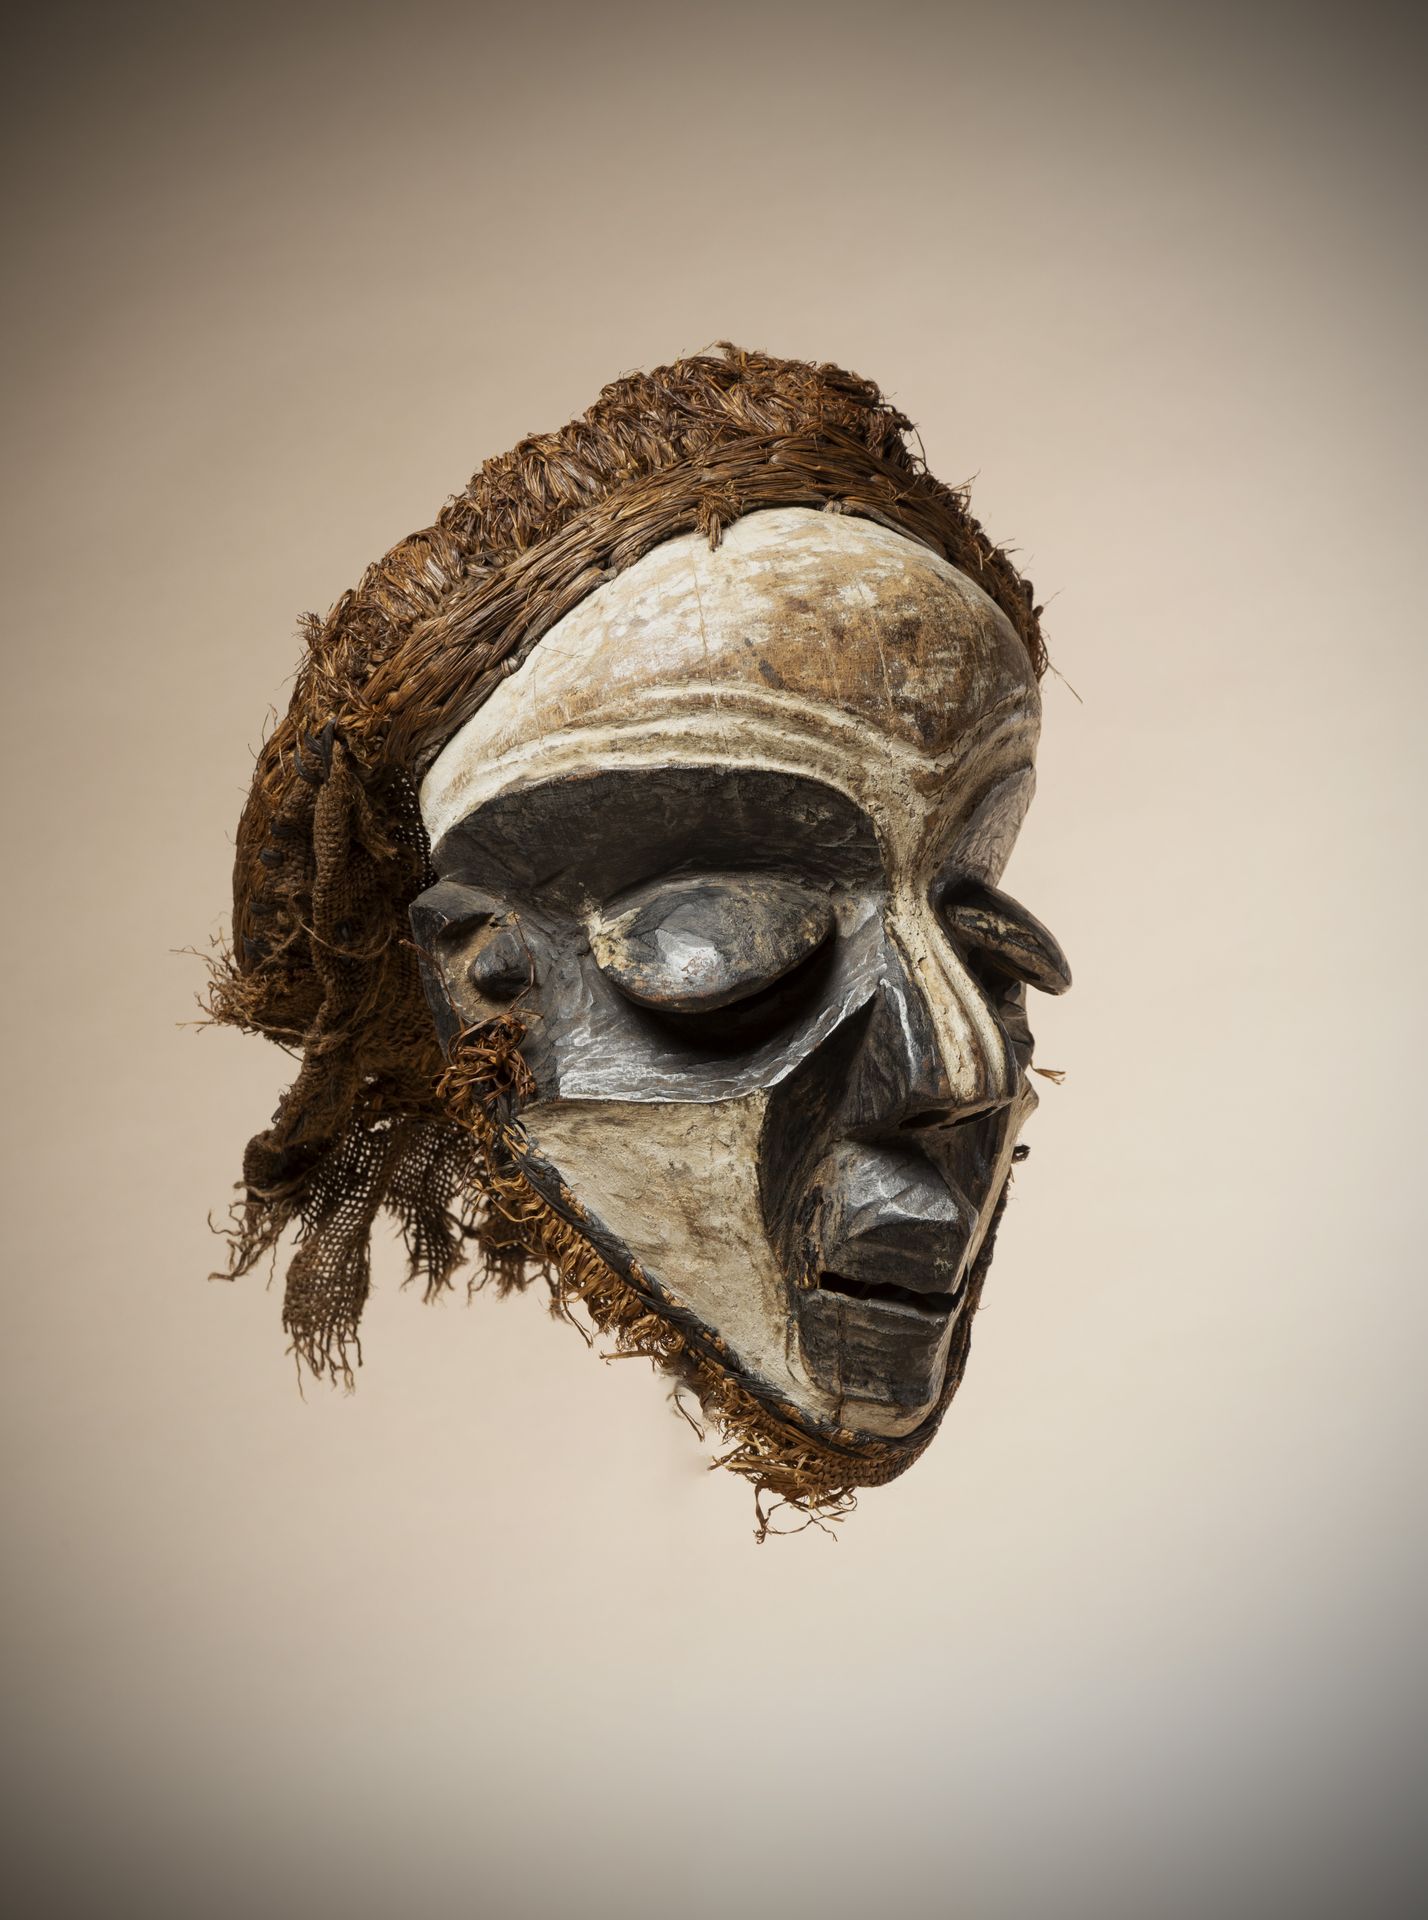 Null PENDE (Congo DRC)

Mask with nervous features reinforced by black and white&hellip;